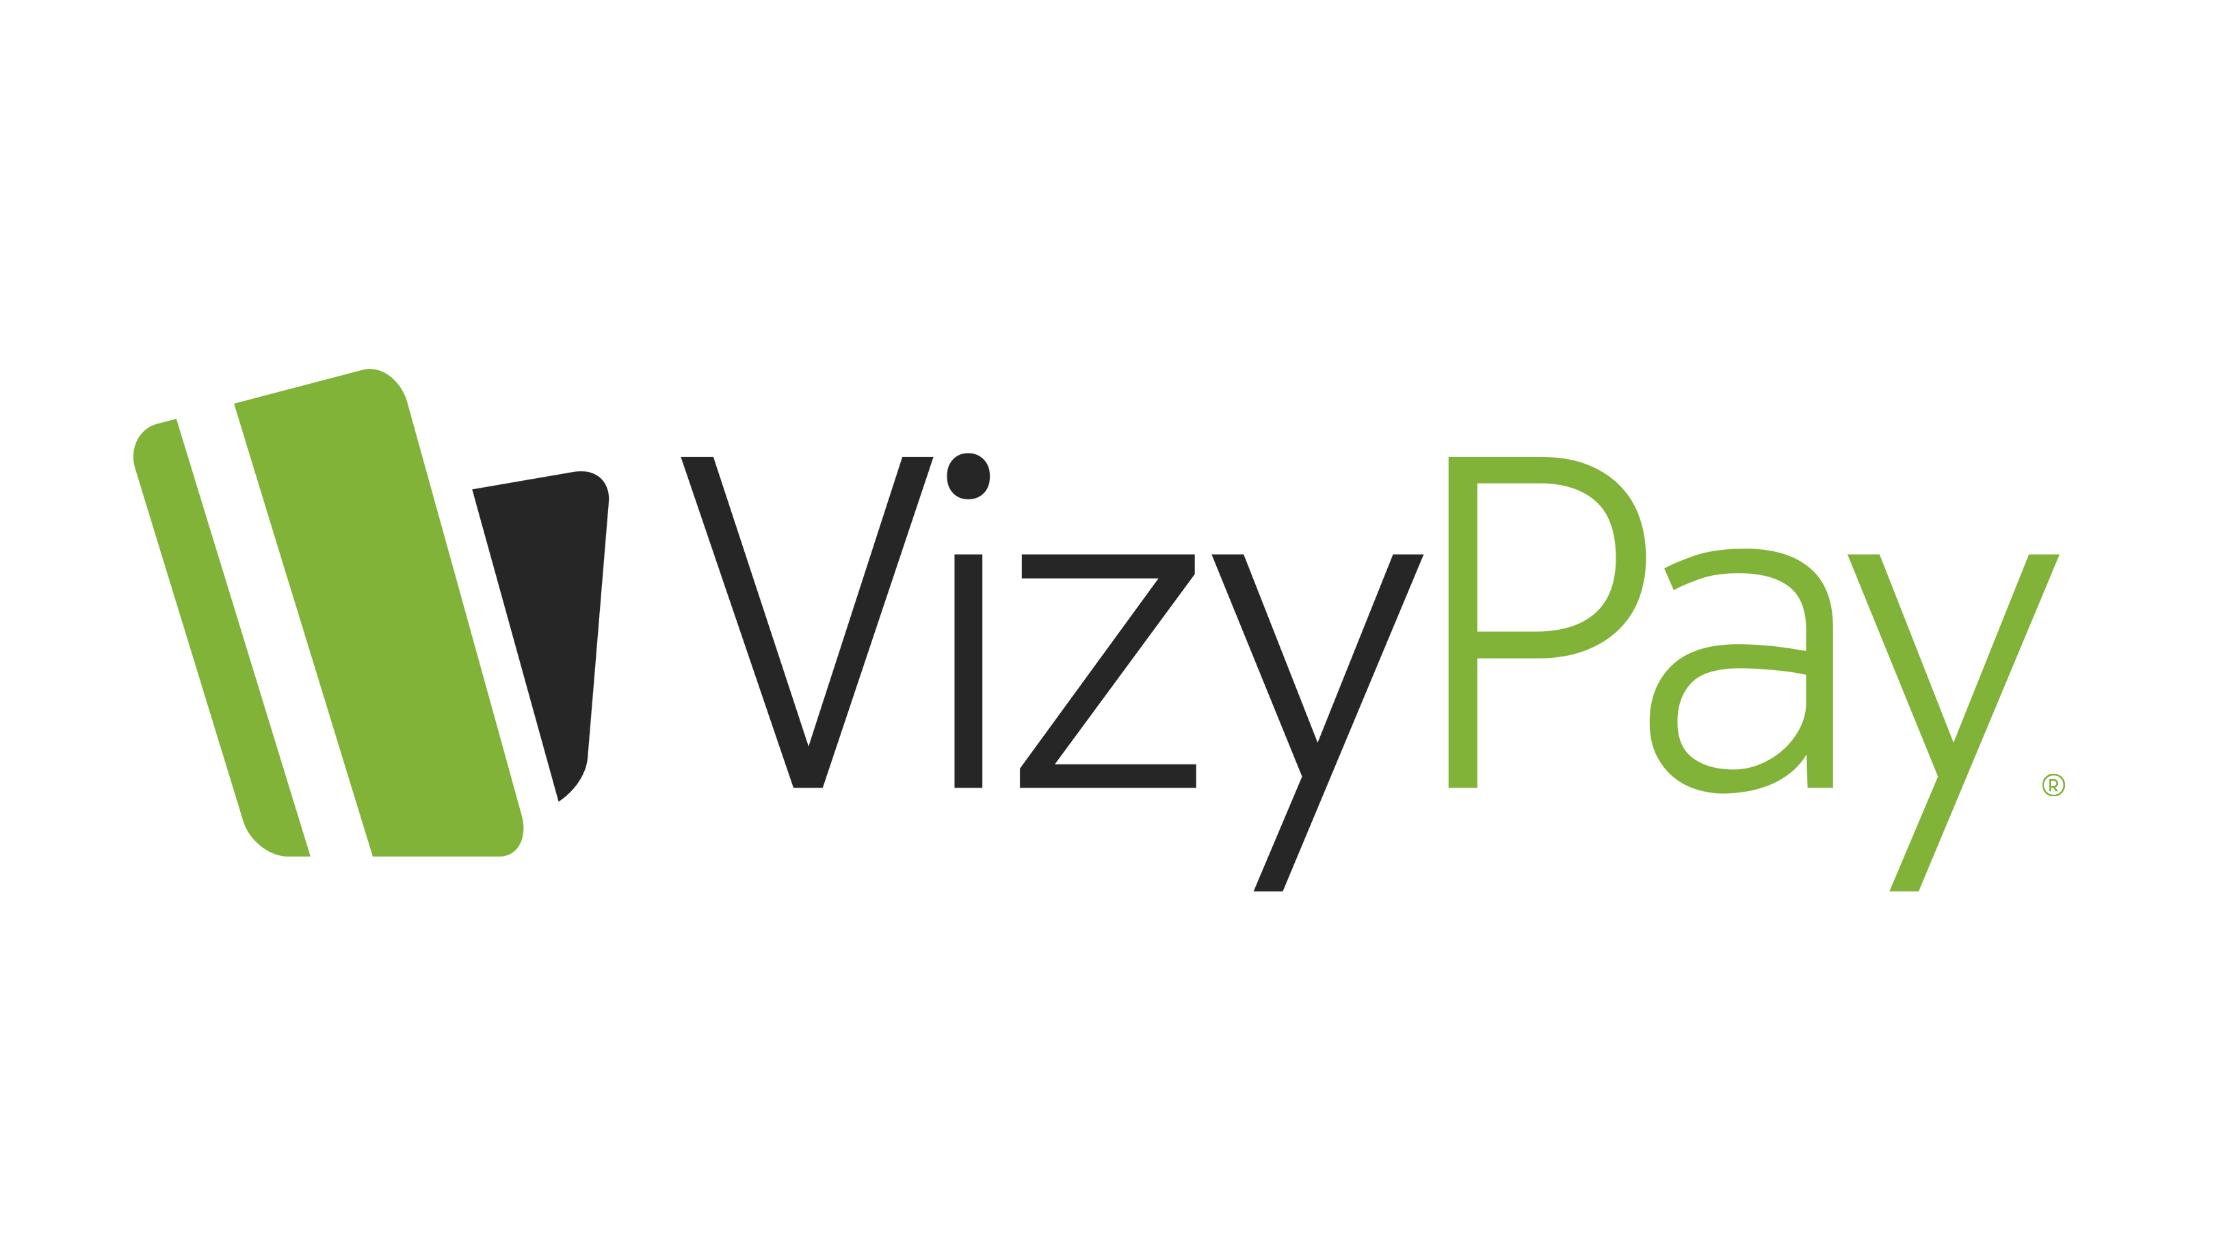 VizyPay Promotes From Within for New Employee Development